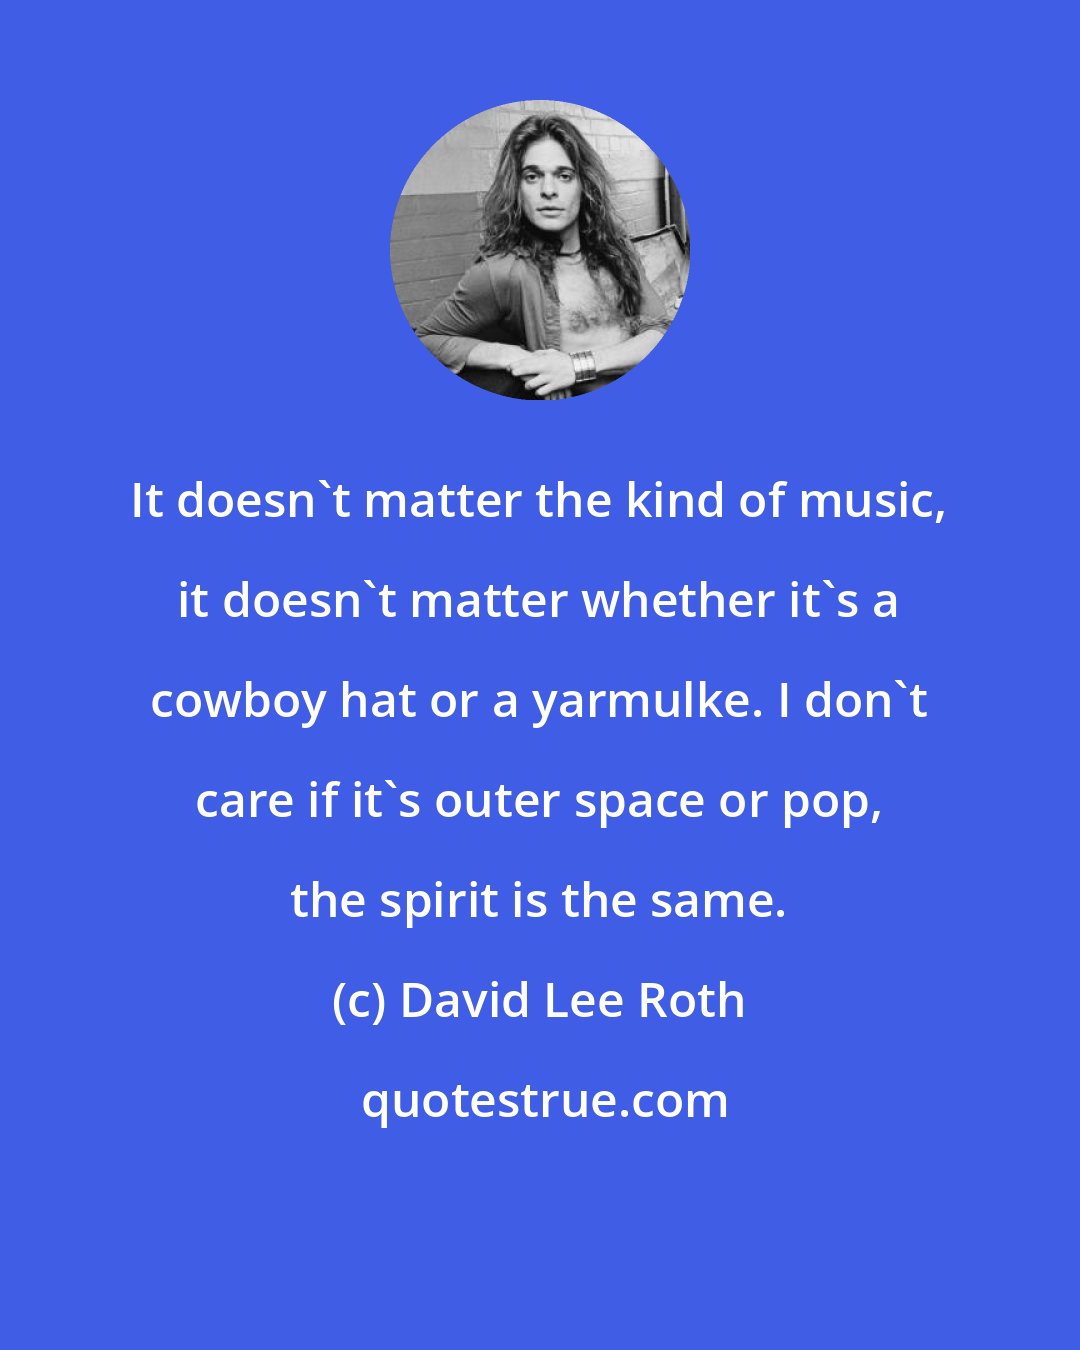 David Lee Roth: It doesn't matter the kind of music, it doesn't matter whether it's a cowboy hat or a yarmulke. I don't care if it's outer space or pop, the spirit is the same.